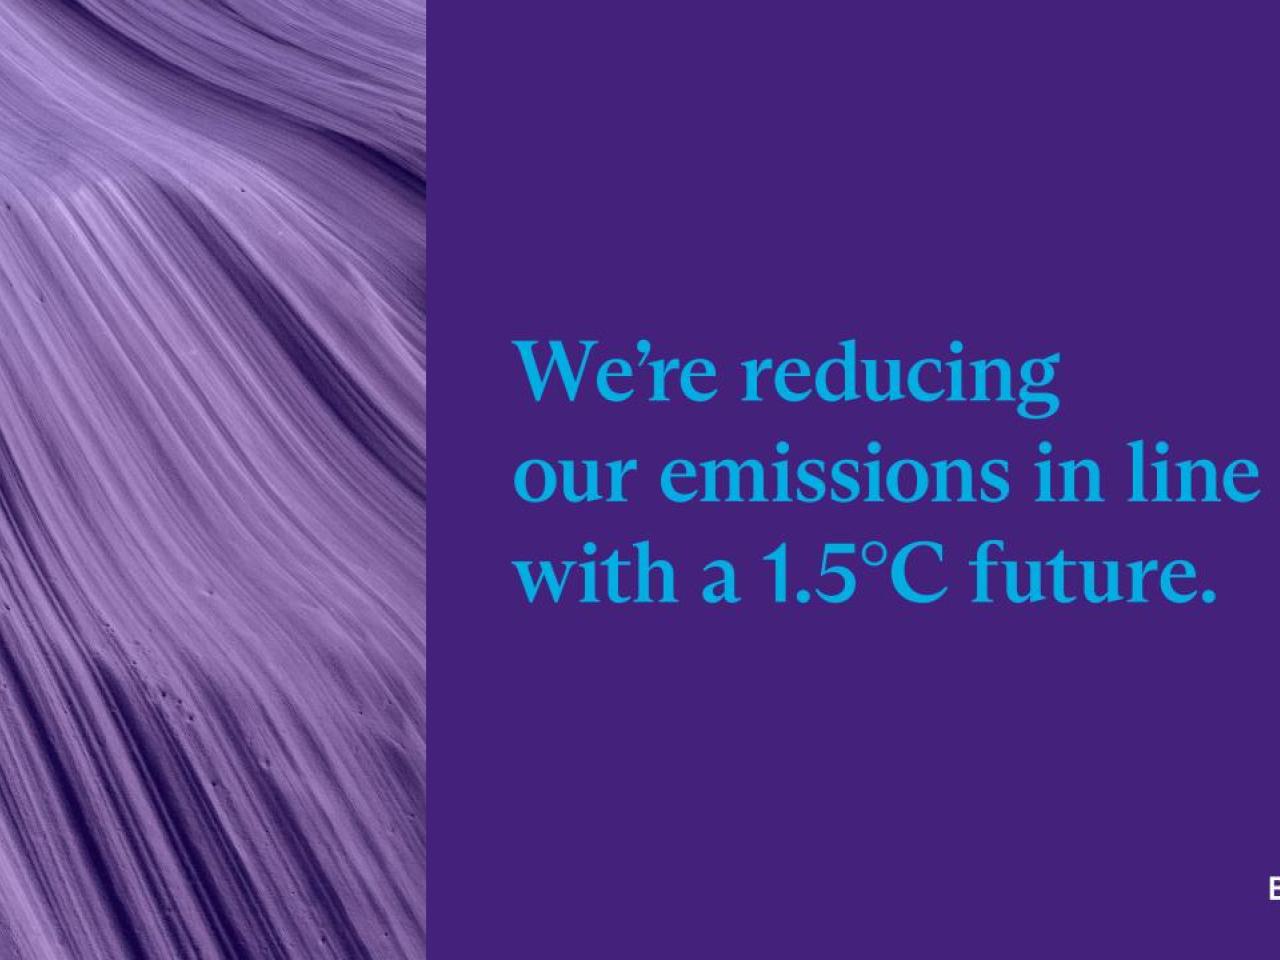 We're reducing our emissions in line with a 1.5C future.